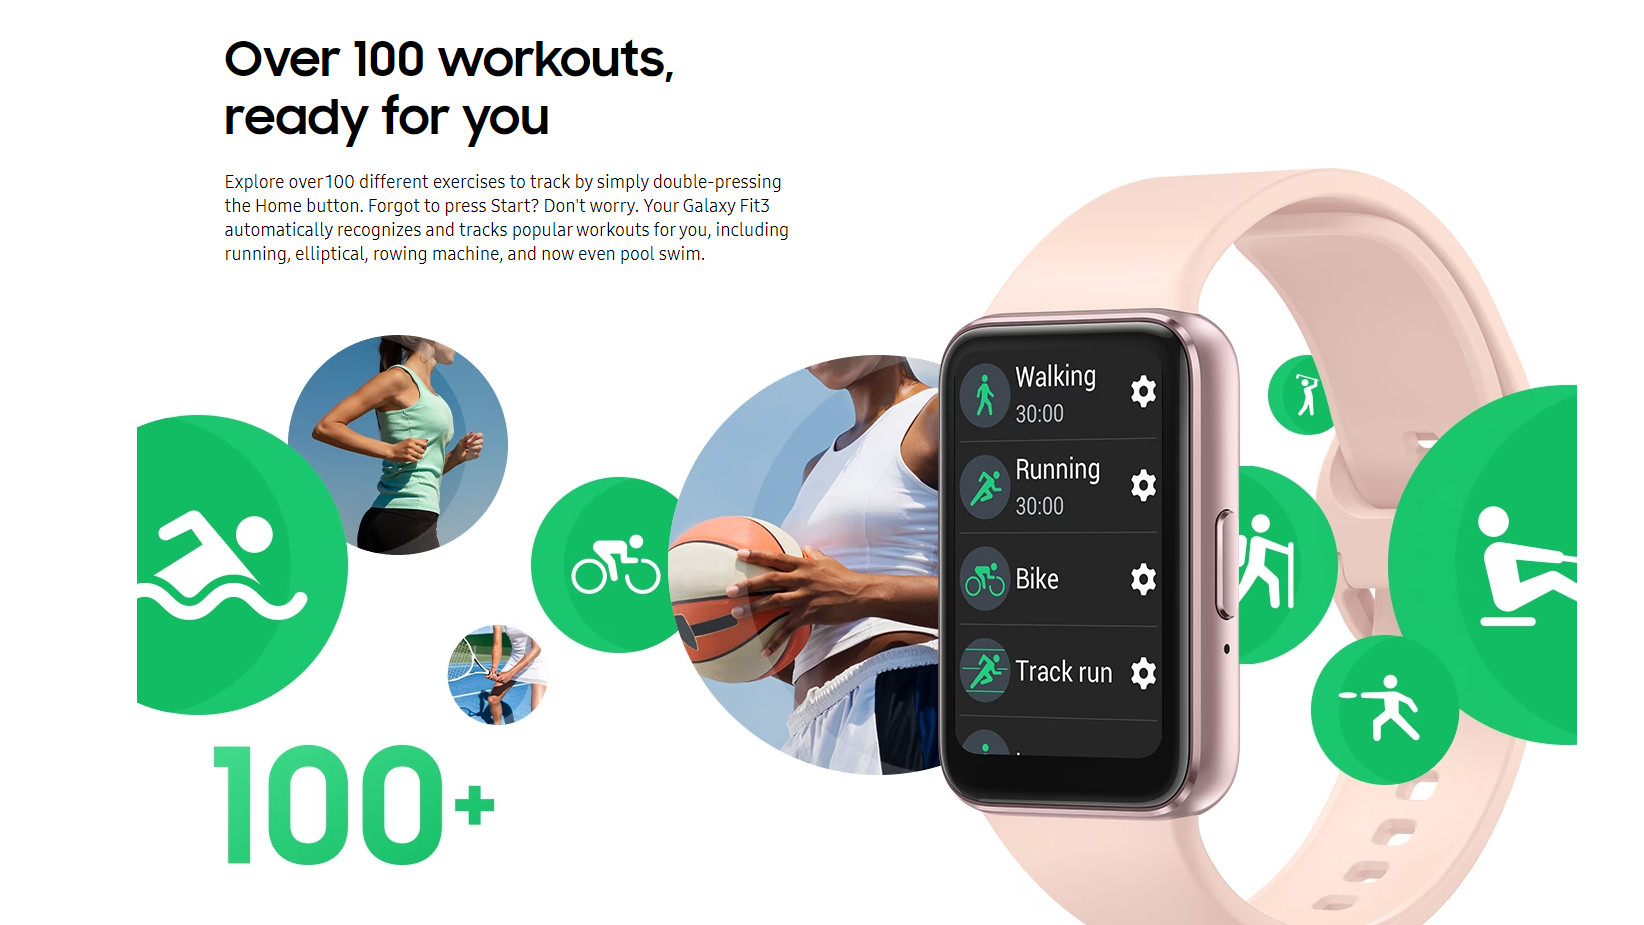 Samsung Galaxy Fit 3 official image 7